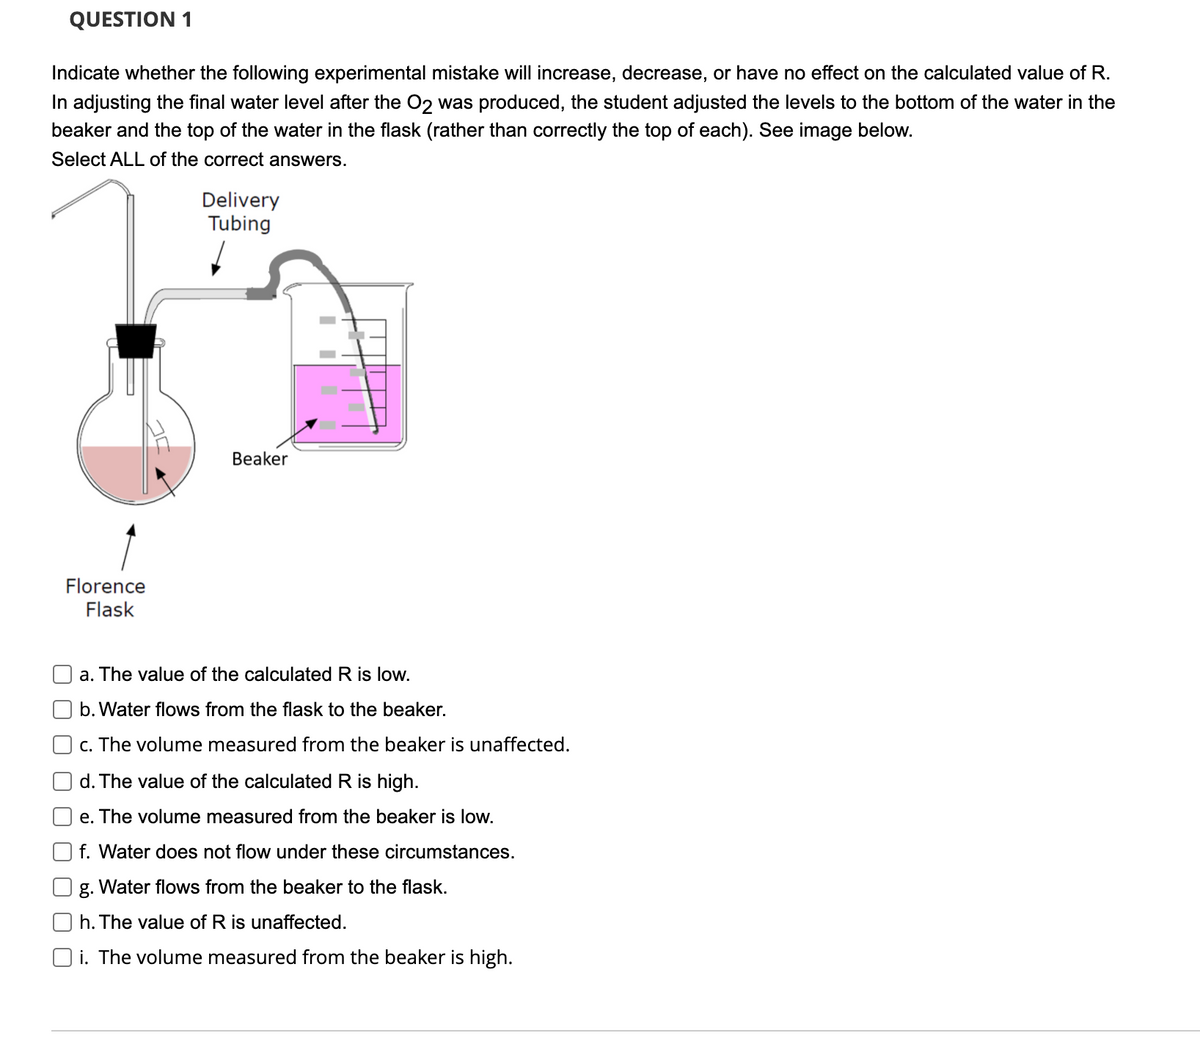 QUESTION 1
Indicate whether the following experimental mistake will increase, decrease, or have no effect on the calculated value of R.
In adjusting the final water level after the O2 was produced, the student adjusted the levels to the bottom of the water in the
beaker and the top of the water in the flask (rather than correctly the top of each). See image below.
Select ALL of the correct answers.
Delivery
Tubing
Beaker
Florence
Flask
a. The value of the calculated R is low.
b. Water flows from the flask to the beaker.
c. The volume measured from the beaker is unaffected.
d. The value of the calculated R is high.
e. The volume measured from the beaker is low.
f. Water does not flow under these circumstances.
g. Water flows from the beaker to the flask.
h. The value of R is unaffected.
O i. The volume measured from the beaker is high.
